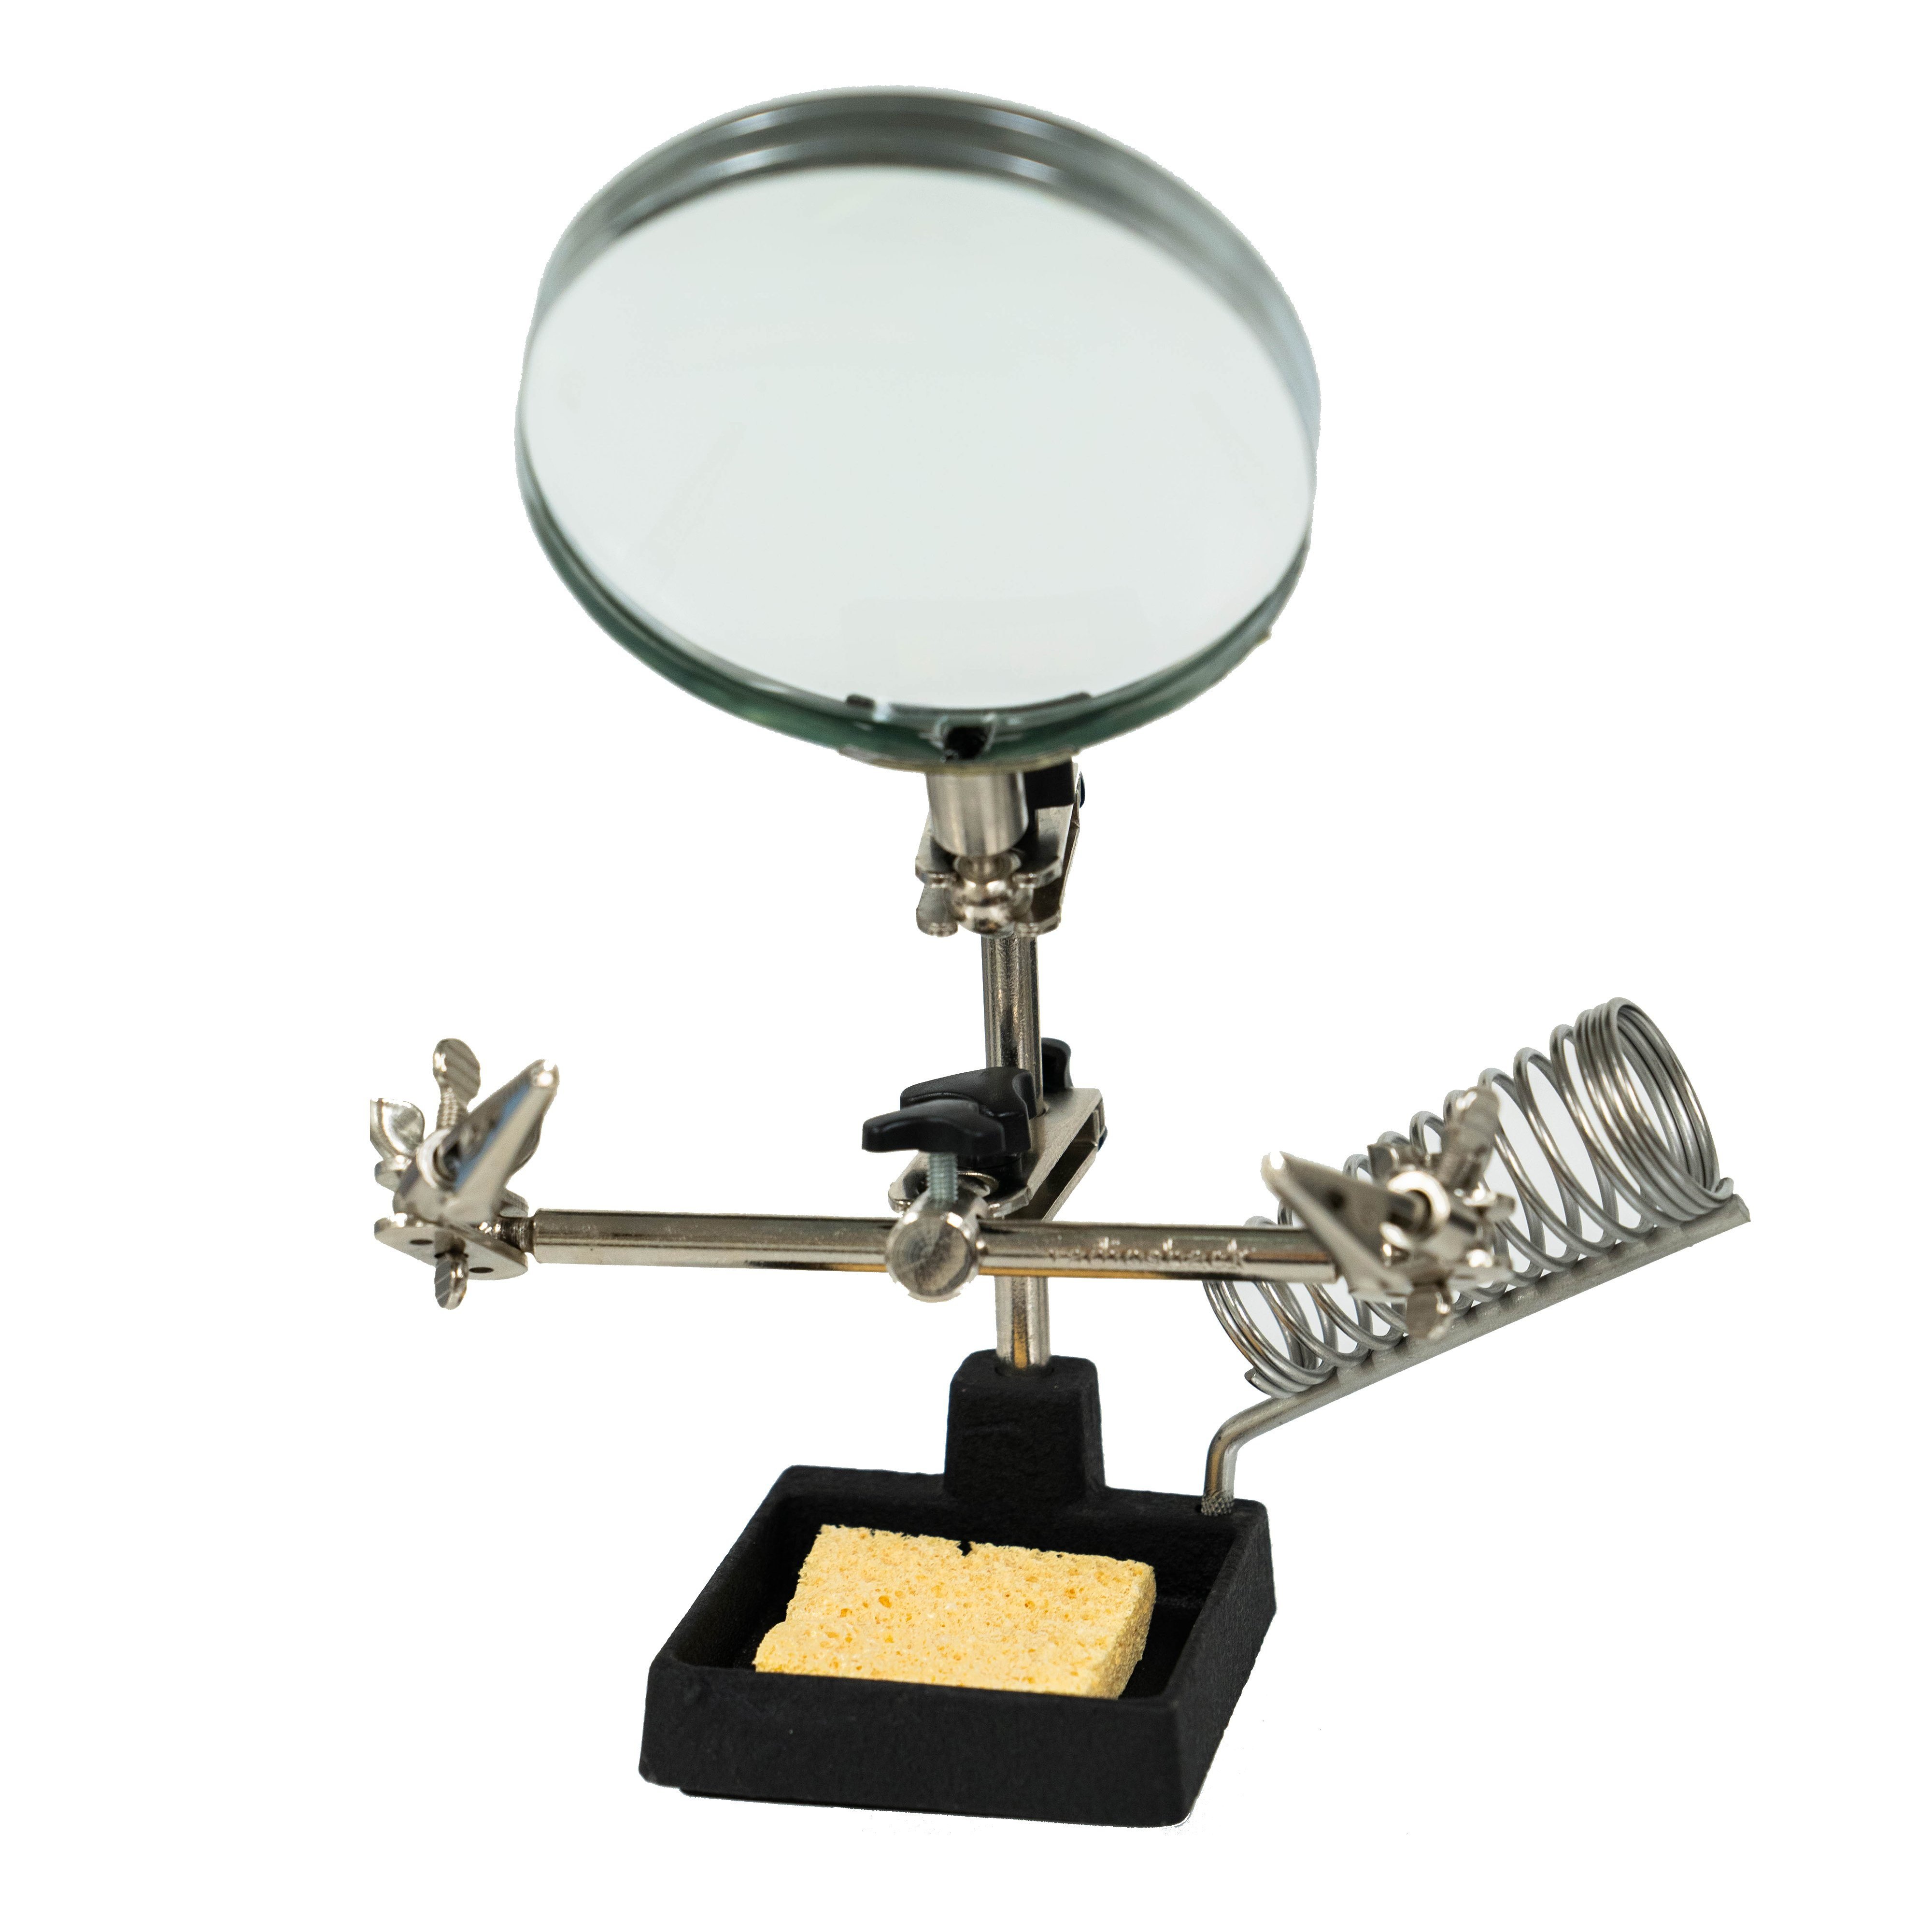 Image of Helping Hands with Magnifier and Soldering Iron Stand